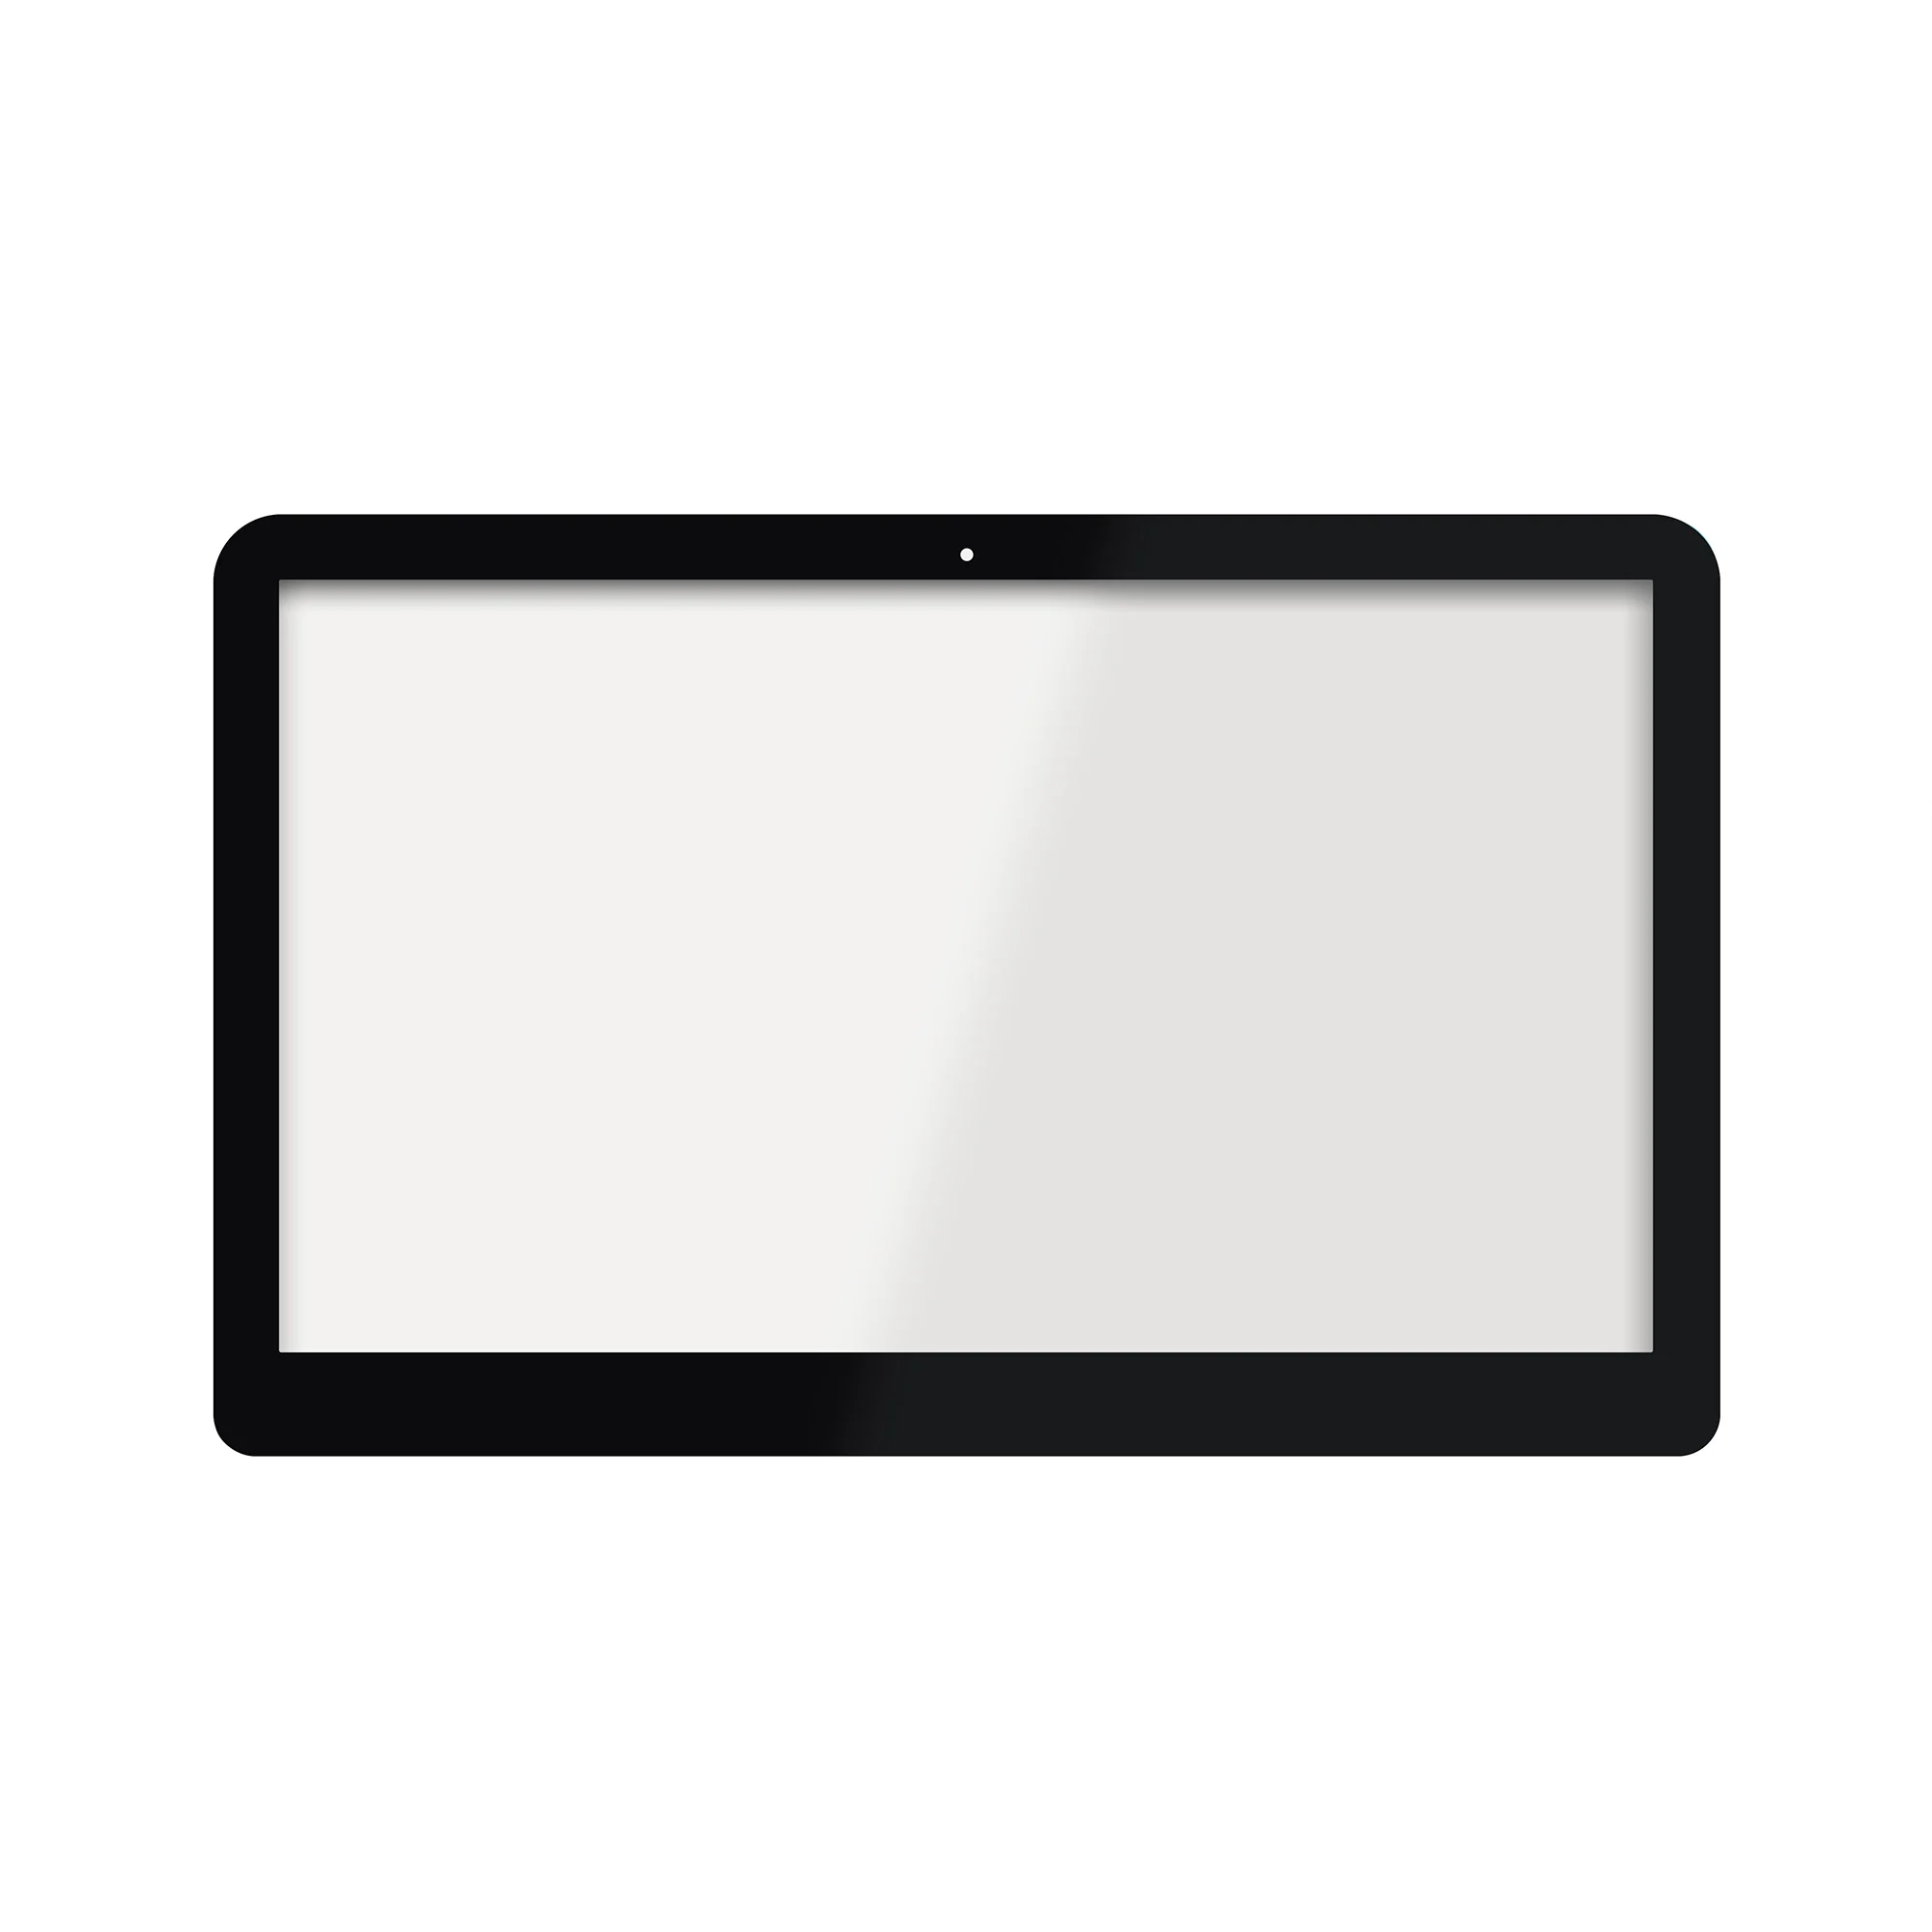 

Touch Screen Digitizer Glass Panel for HP Pavilion x360 15-bk193ms 15-bk163dx 15-bk062na 15-bk075nr 15-bk020wm 15-bk102ng 15-bk